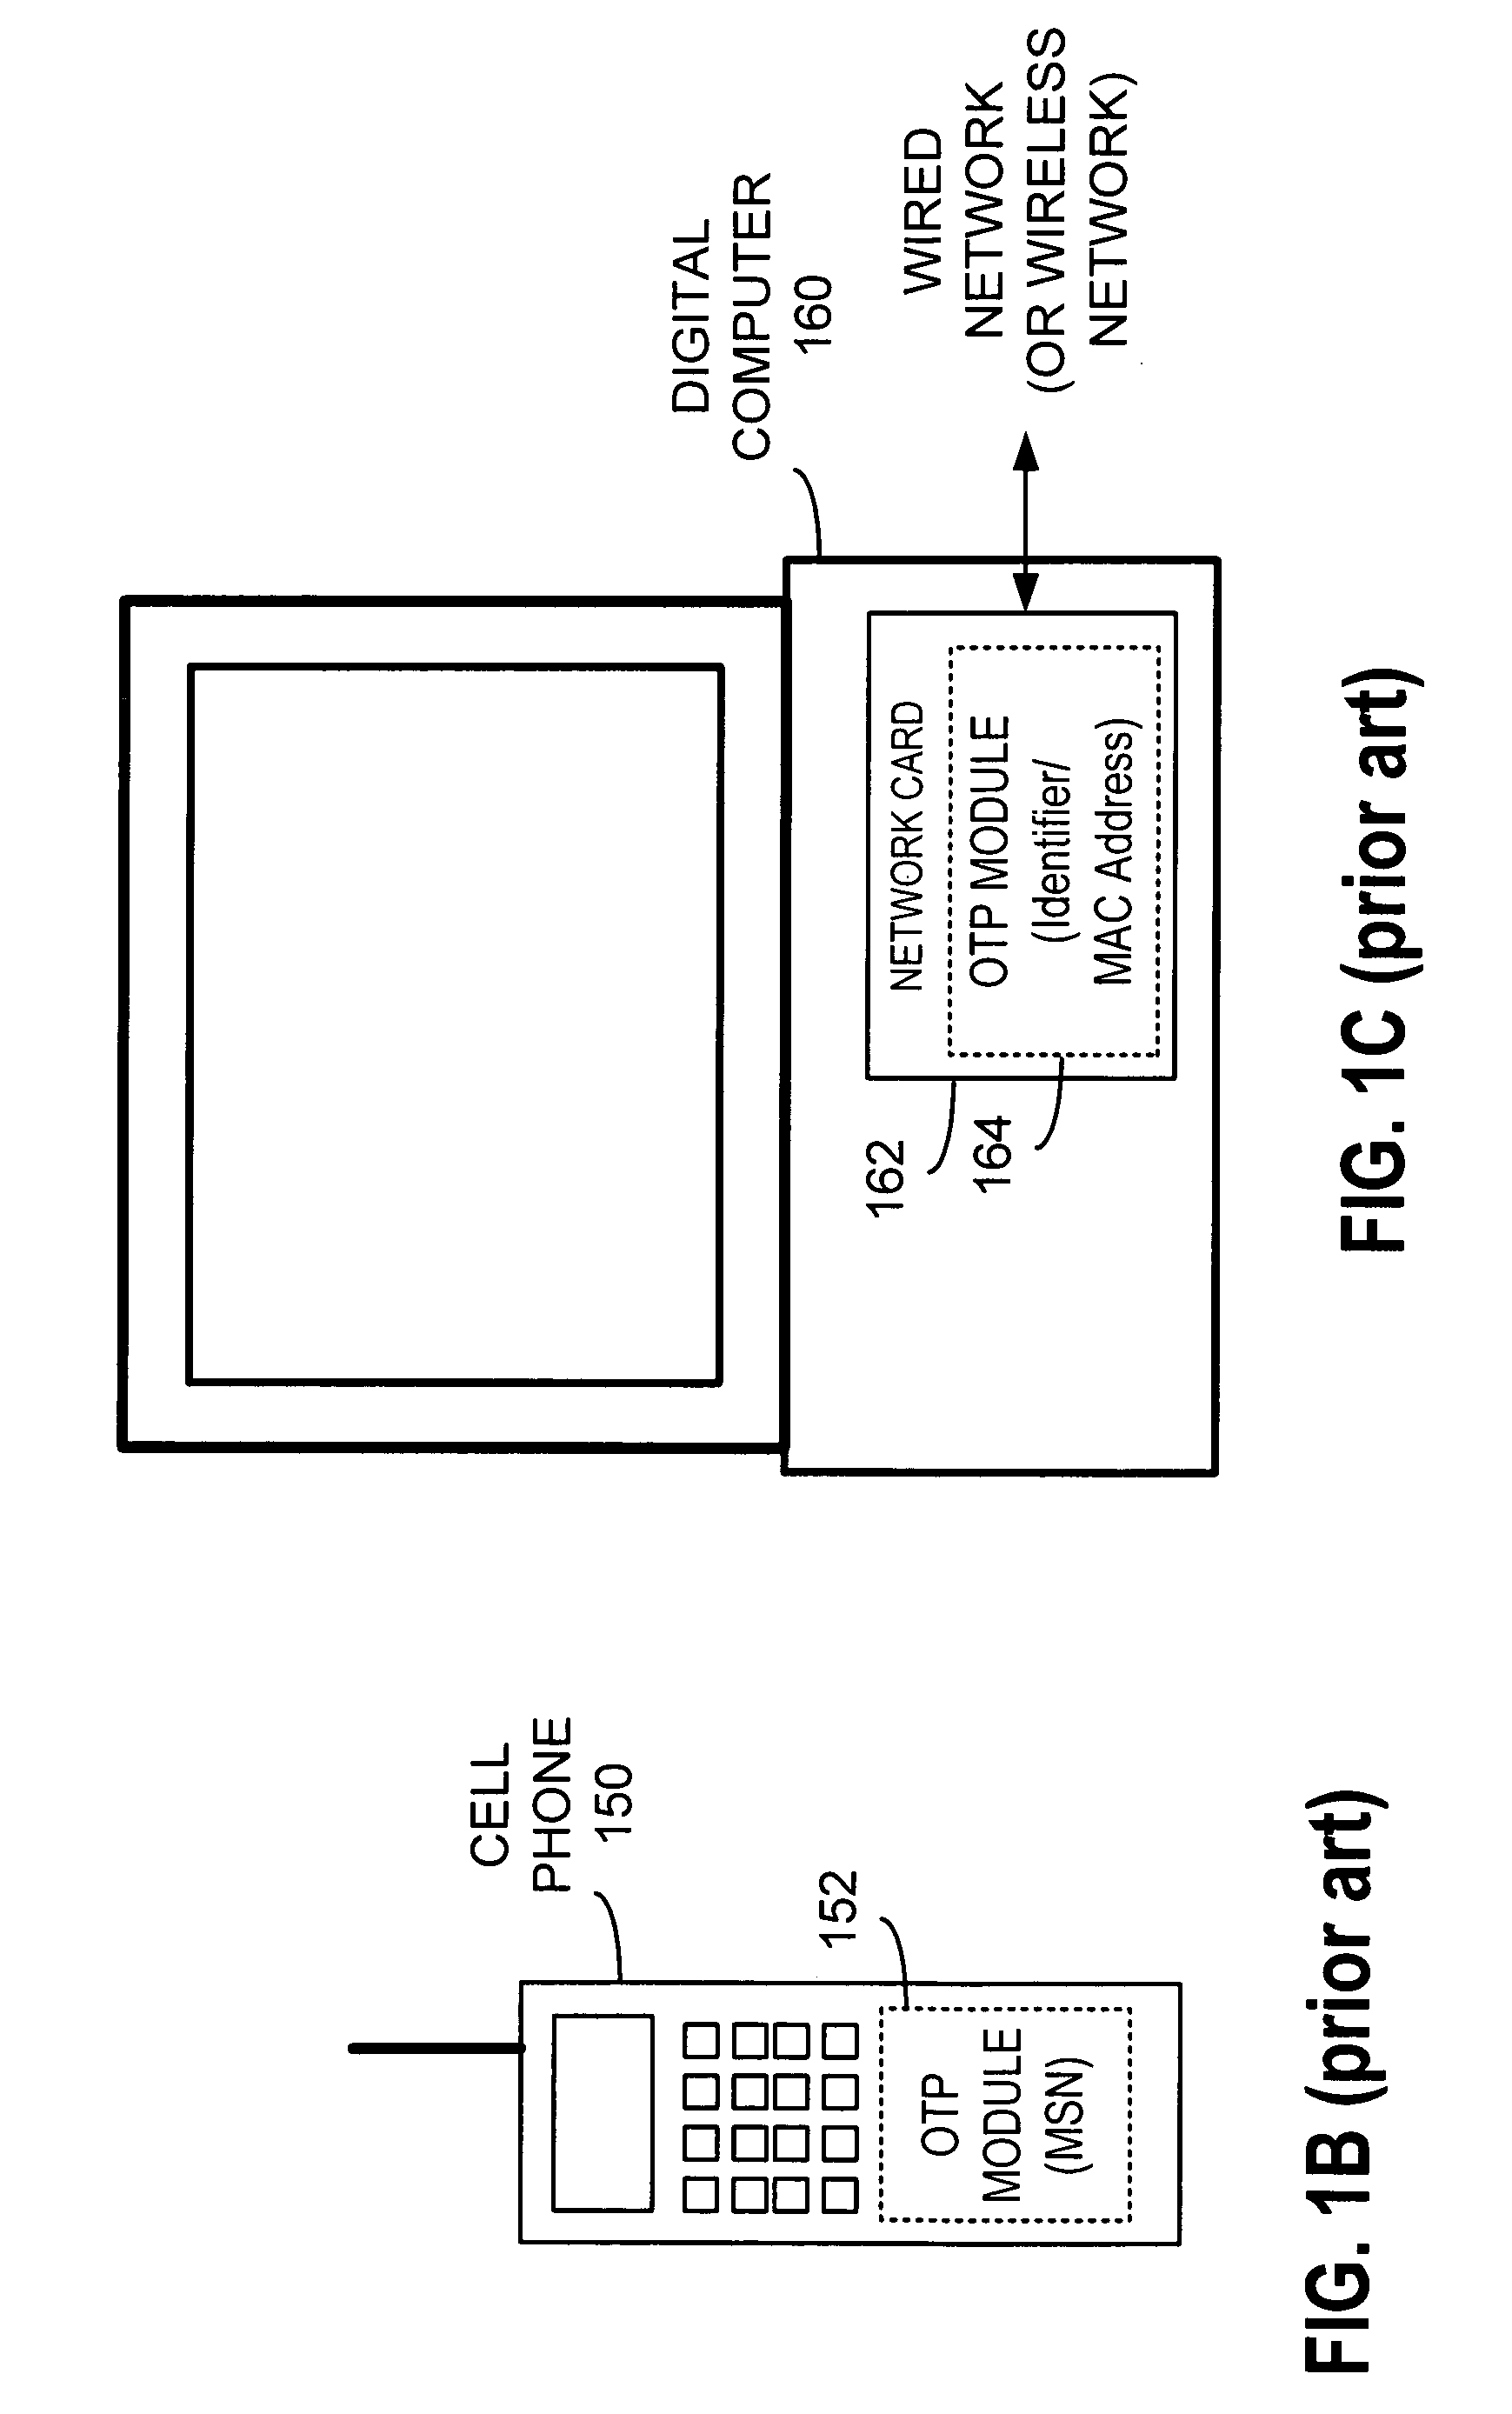 Variable Hamming error correction for a one-time-programmable-ROM